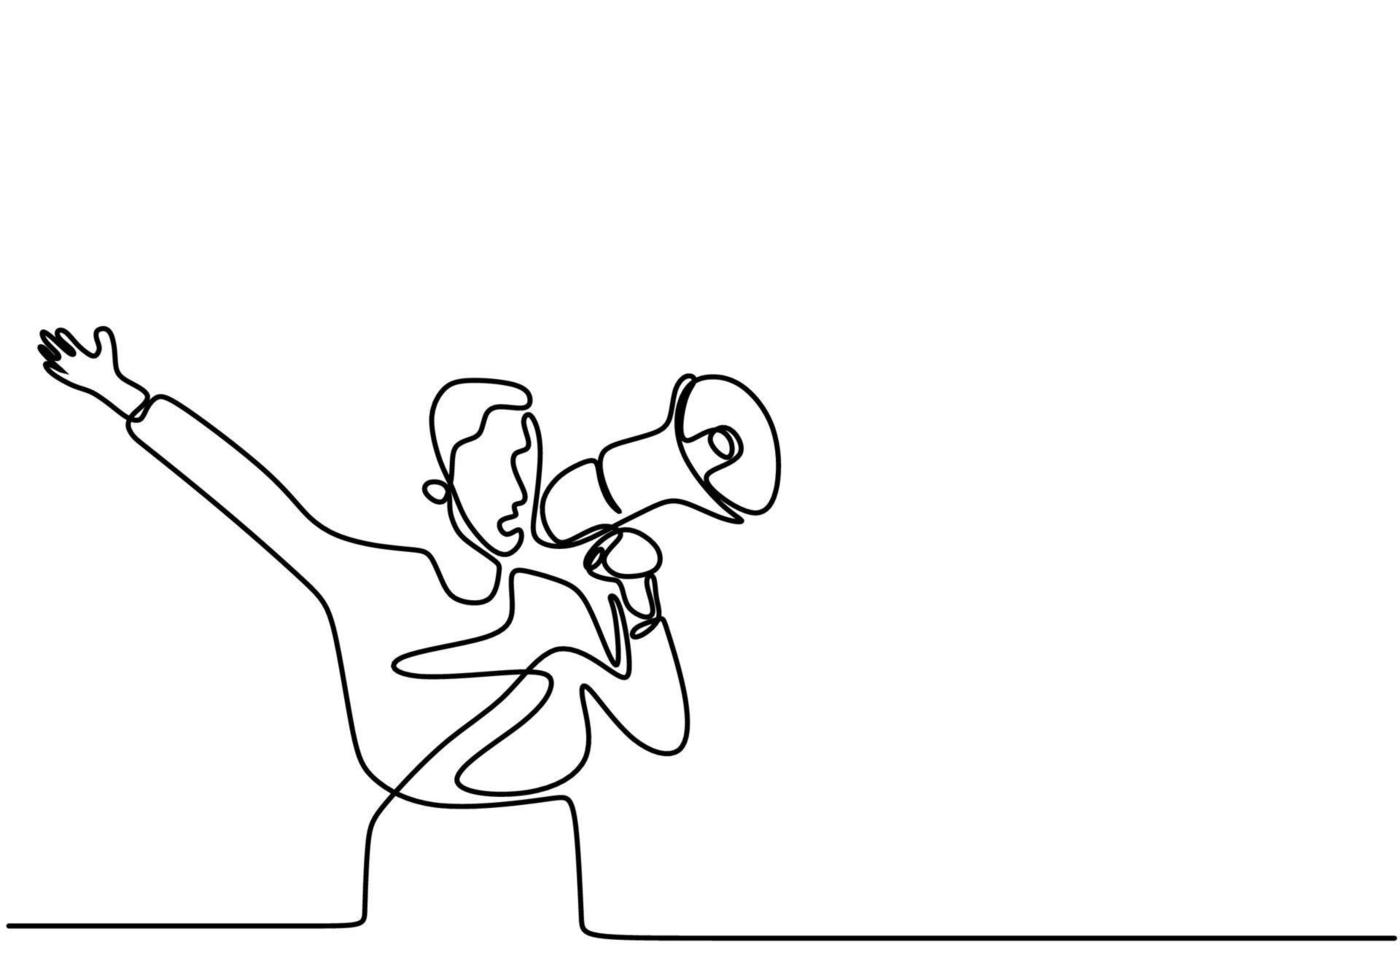 Continuous one line drawn a man talking into a loudspeaker. A male spoke excitedly while holding the megaphone. The concept of announcement, warning, oratory, eloquence, loud statement, publicity vector